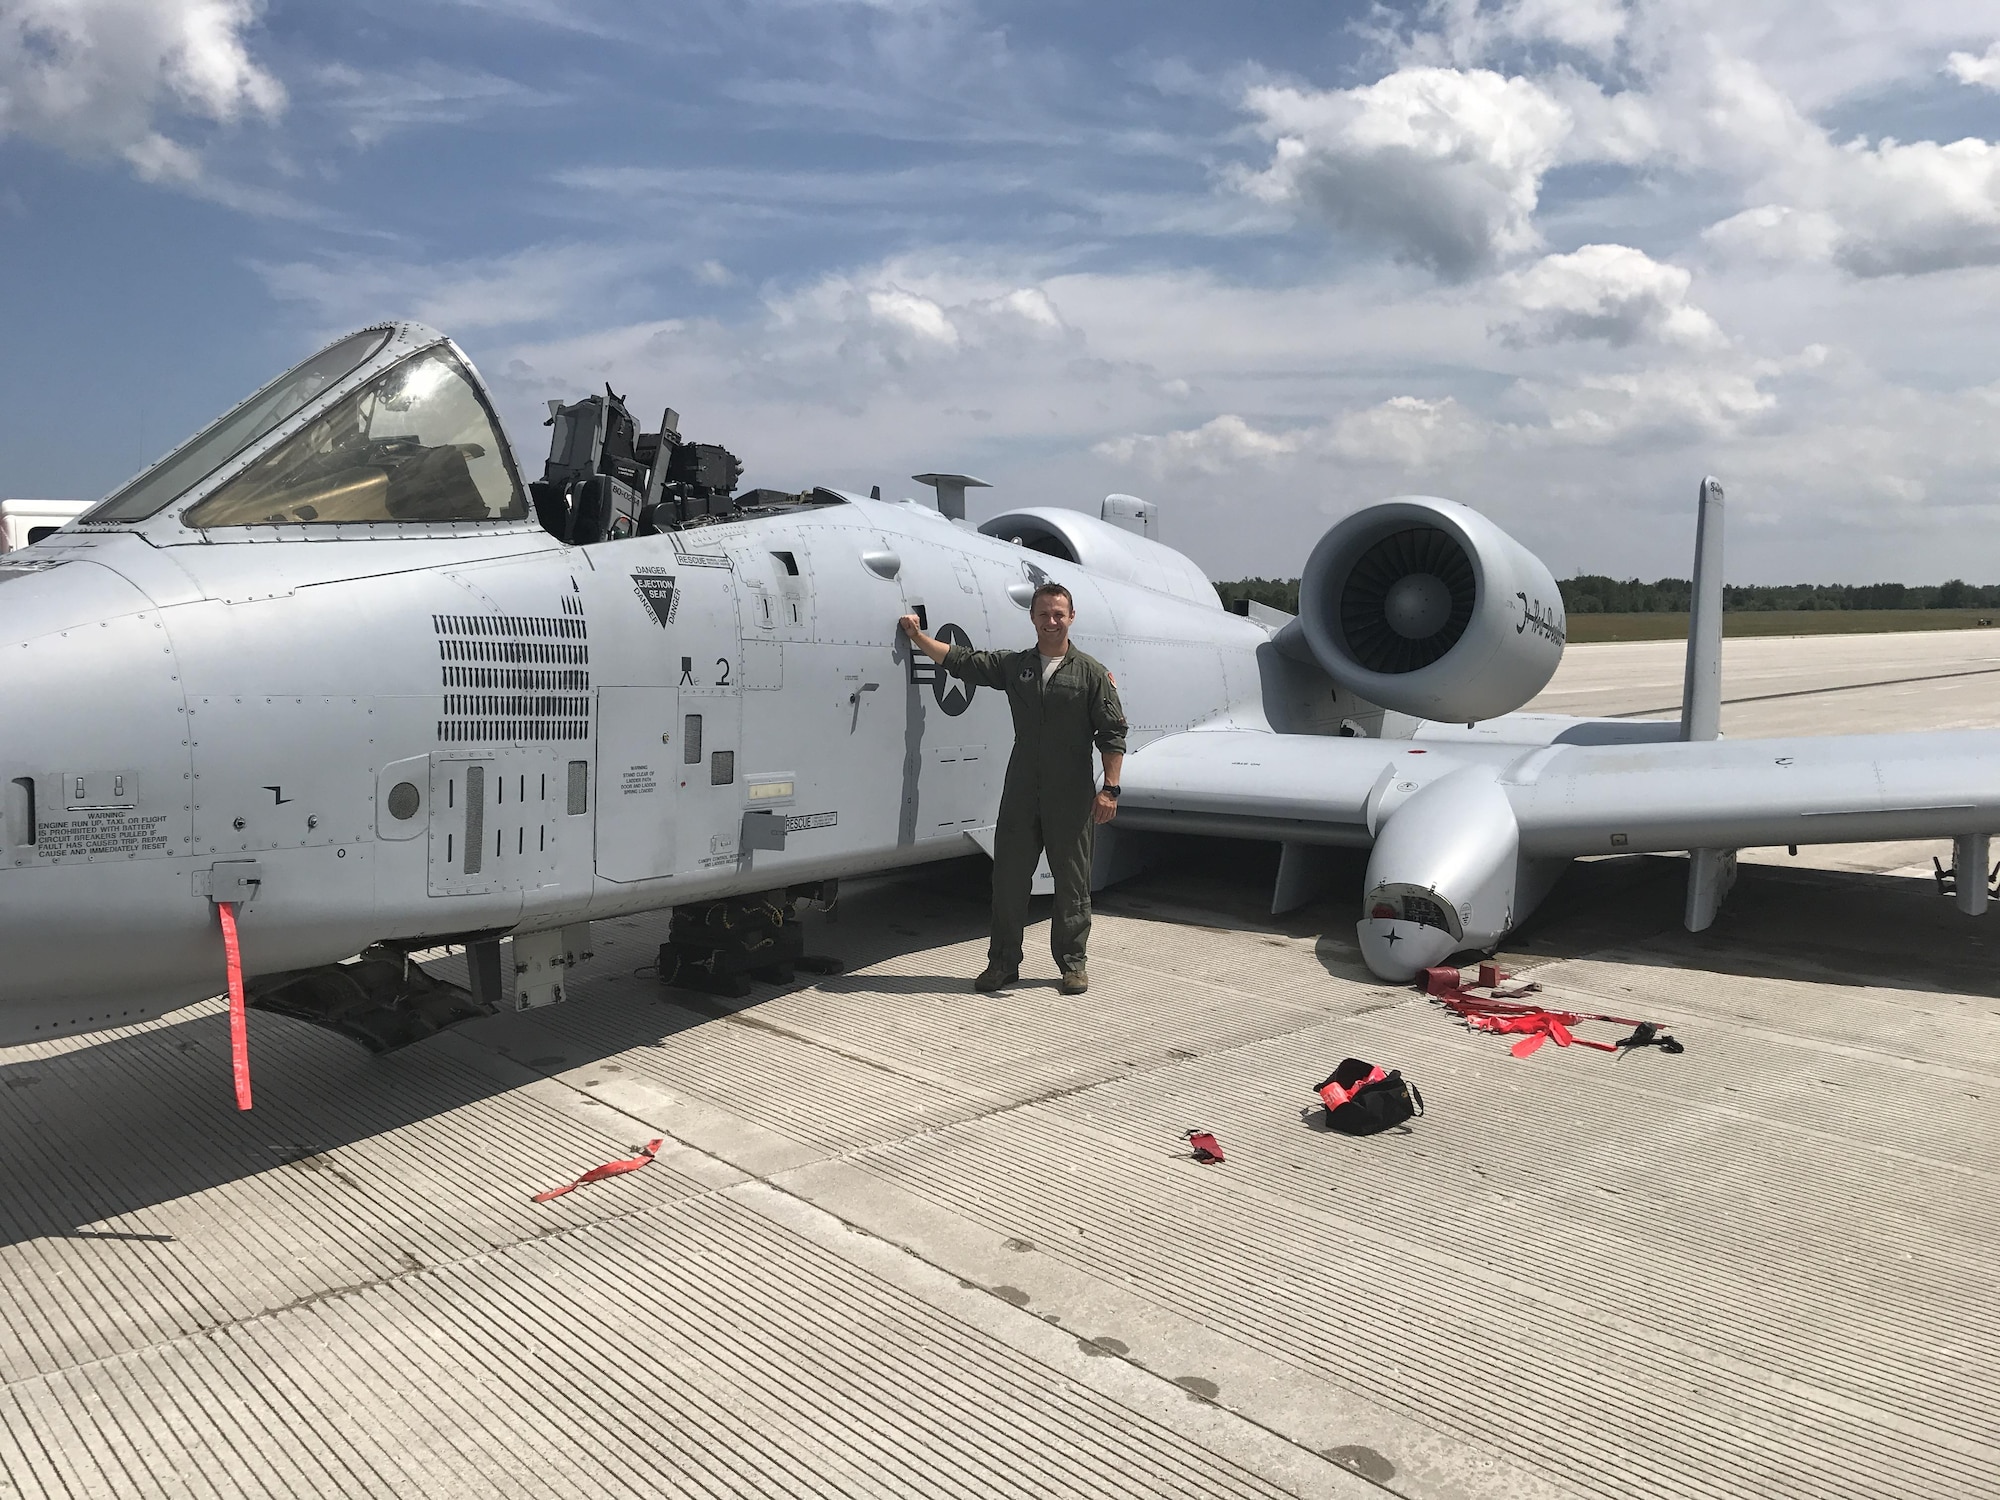 Capt. Brett DeVries, an A-10 Thunderbolt II pilot of the 107th Fighter Squadron from Selfridge Air National Guard Base, poses next to the aircraft he safely landed after a malfunction forced him to make an emergency landing July 20 at the Alpena Combat Readiness Training Center.  (Photo courtesy U.S. Air National Guard)